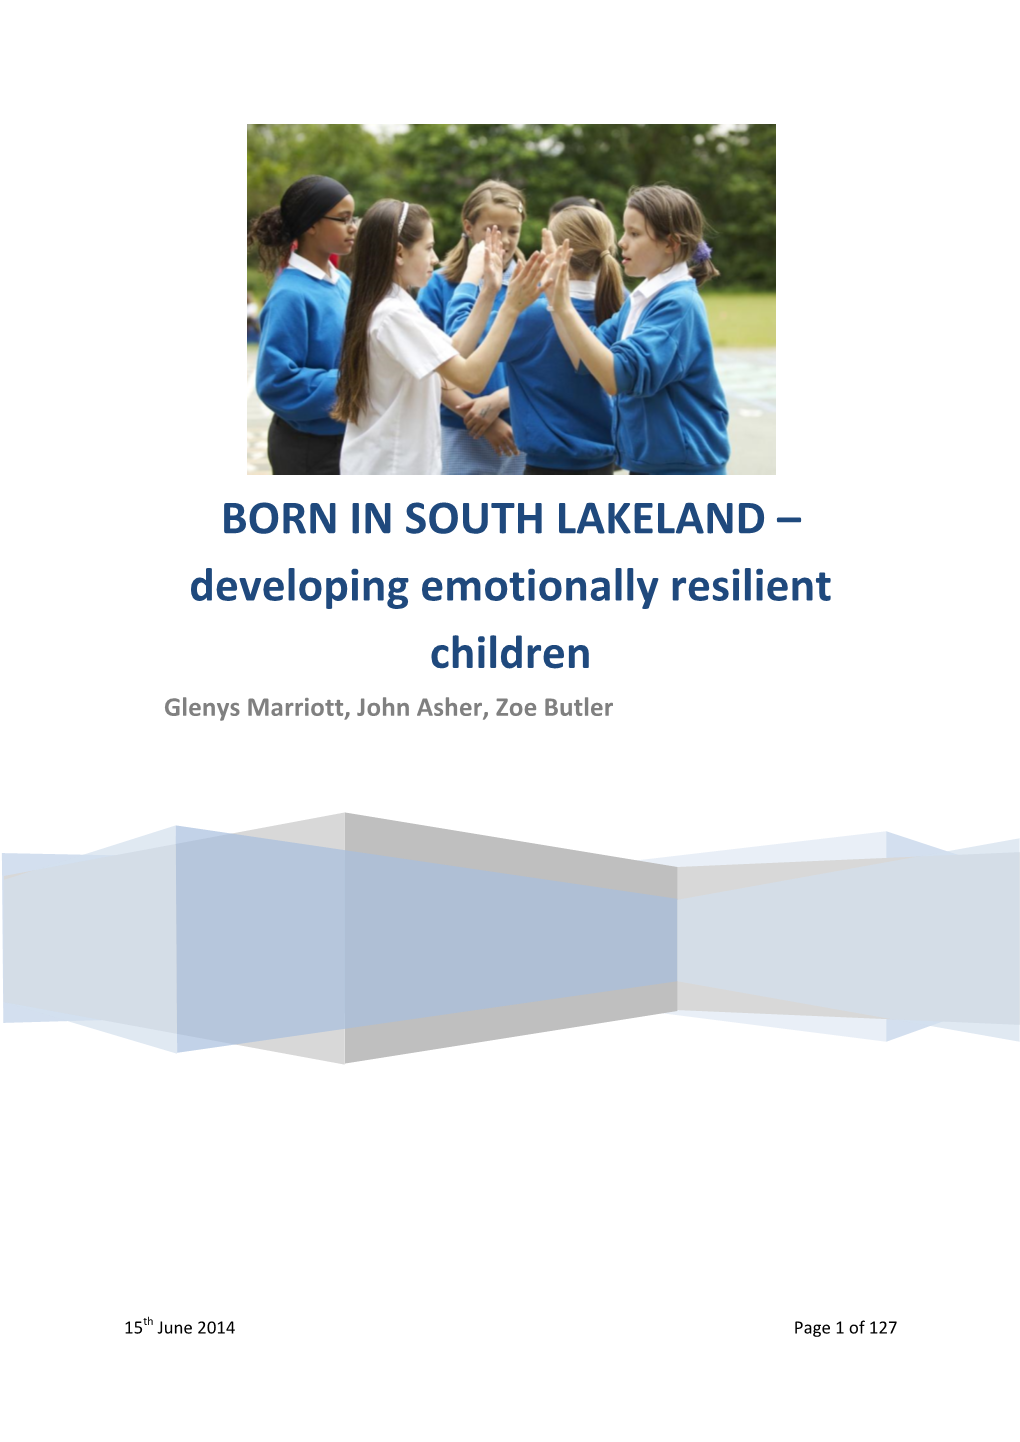 BORN in SOUTH LAKELAND – Developing Emotionally Resilient